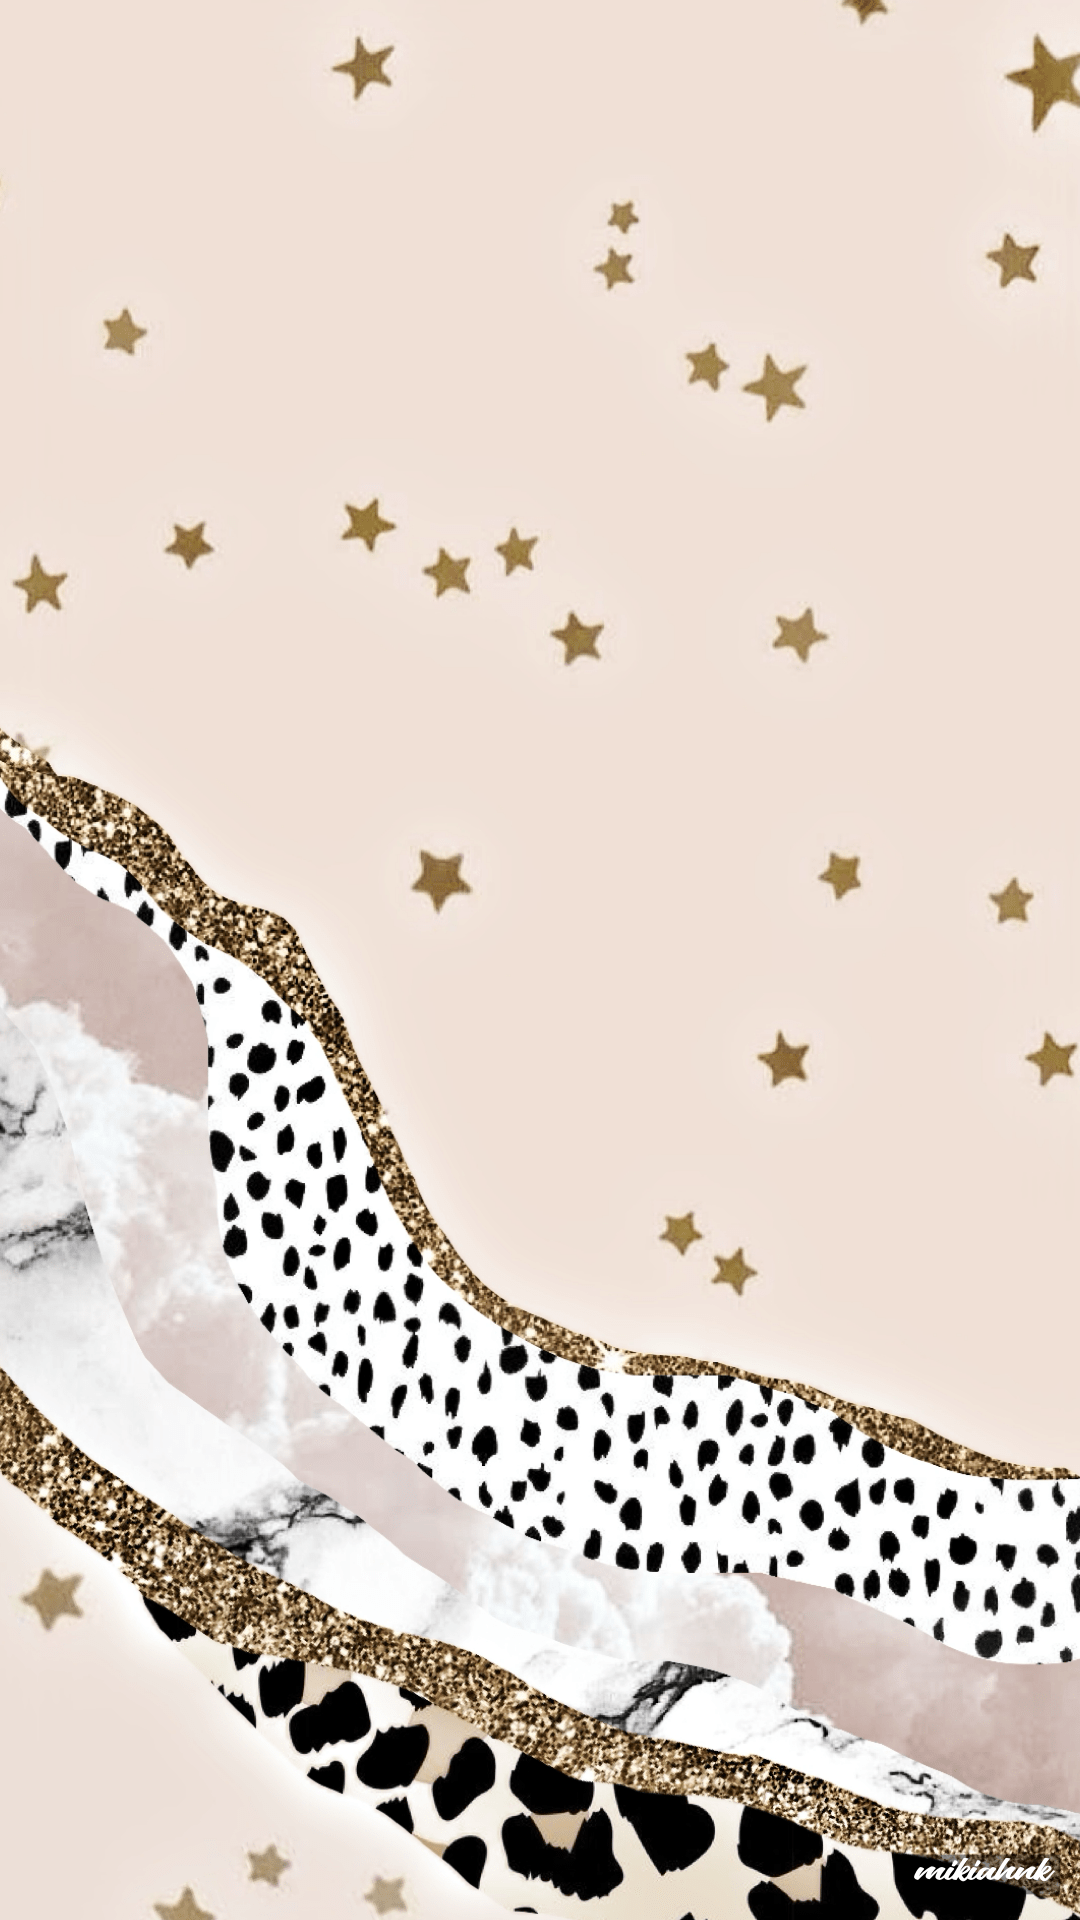 Aesthetic wallpaper for phone with marble, gold, and leopard print - Pattern